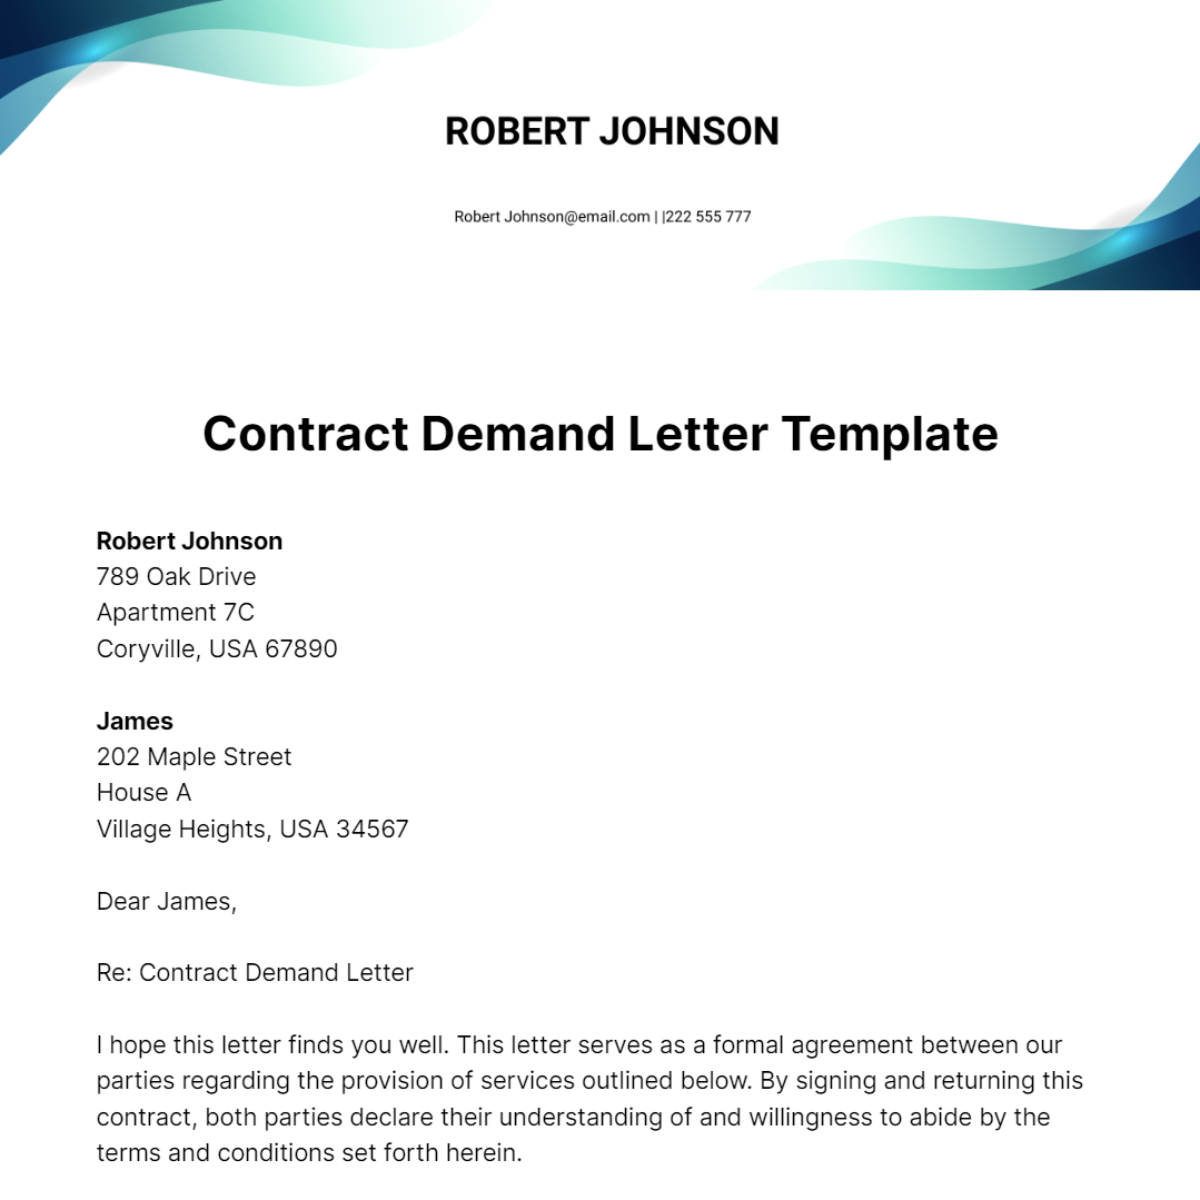 Free Contract Demand Letter Template